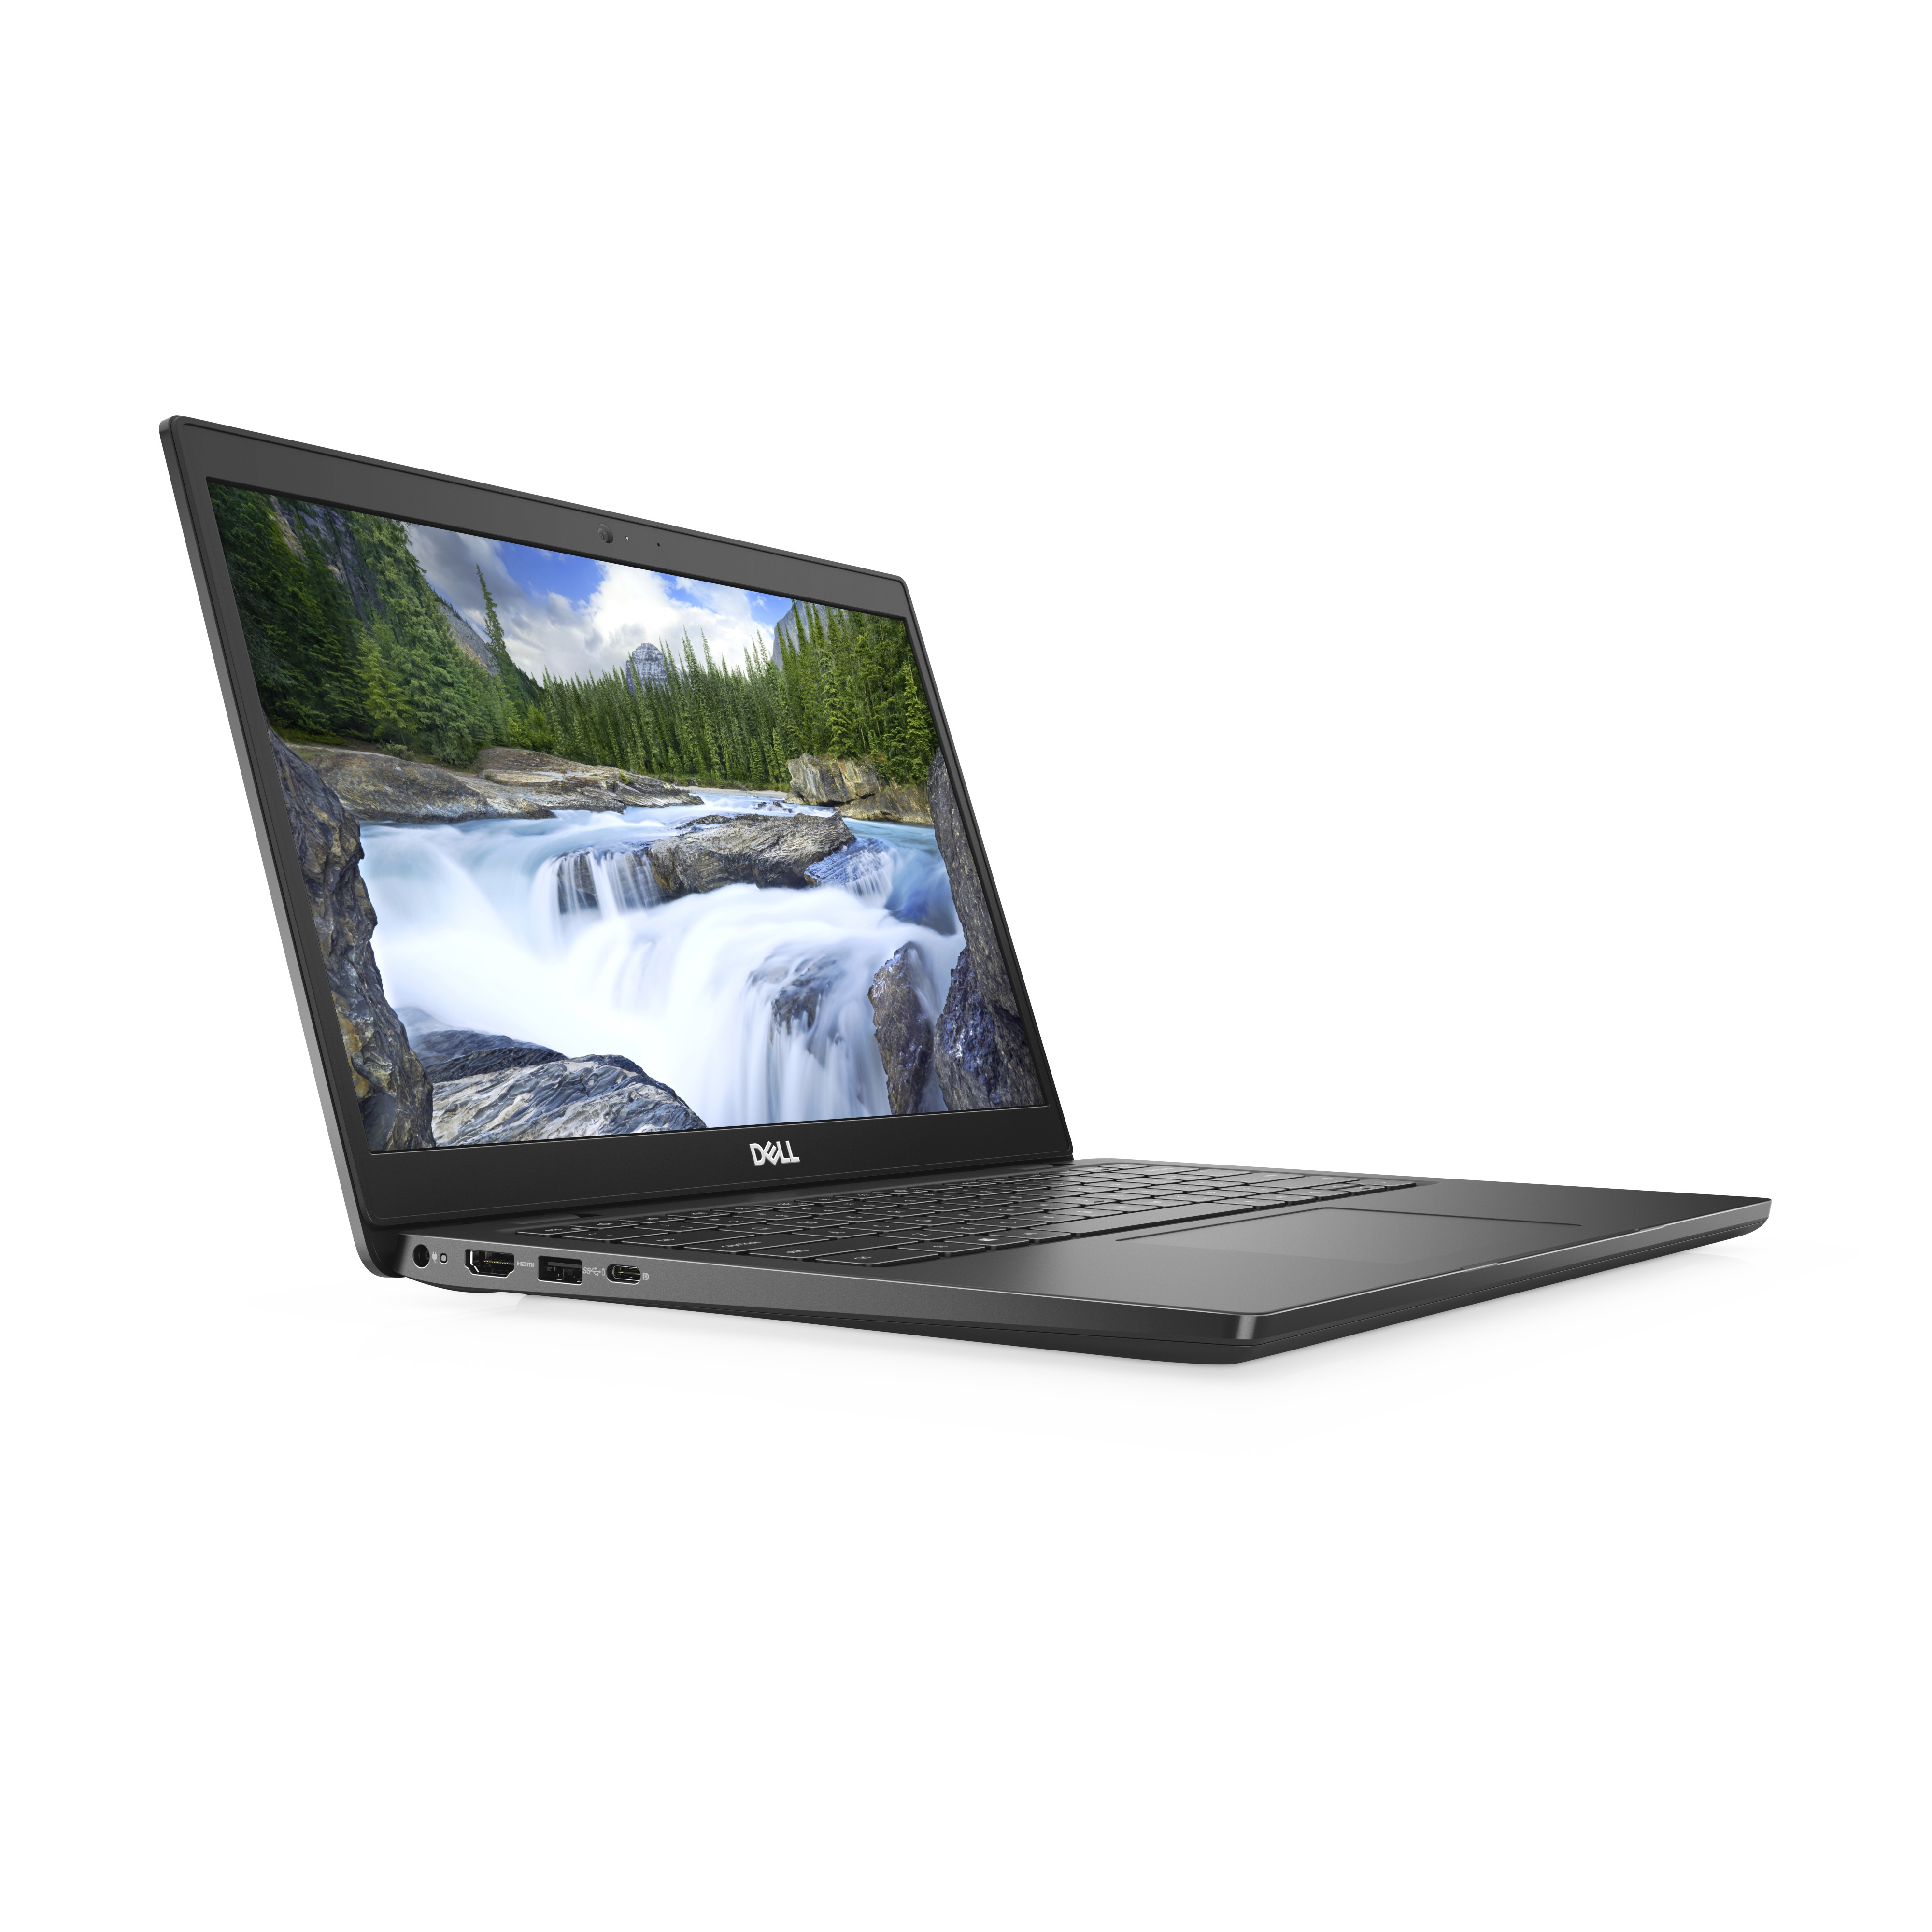 Latitude 3420 - Core I3 1115g4 / 3 Ghz - Win 10 Pro 64-bit - Uhd Graphics - 4 Gb Ram - 128 Gb Ssd Nvme, Class 35 - 14" Tn 1366 X 768 (hd) - Wi-fi 6 - With 1 Year Hardware Service With Onsite/in-home - image 3 of 5